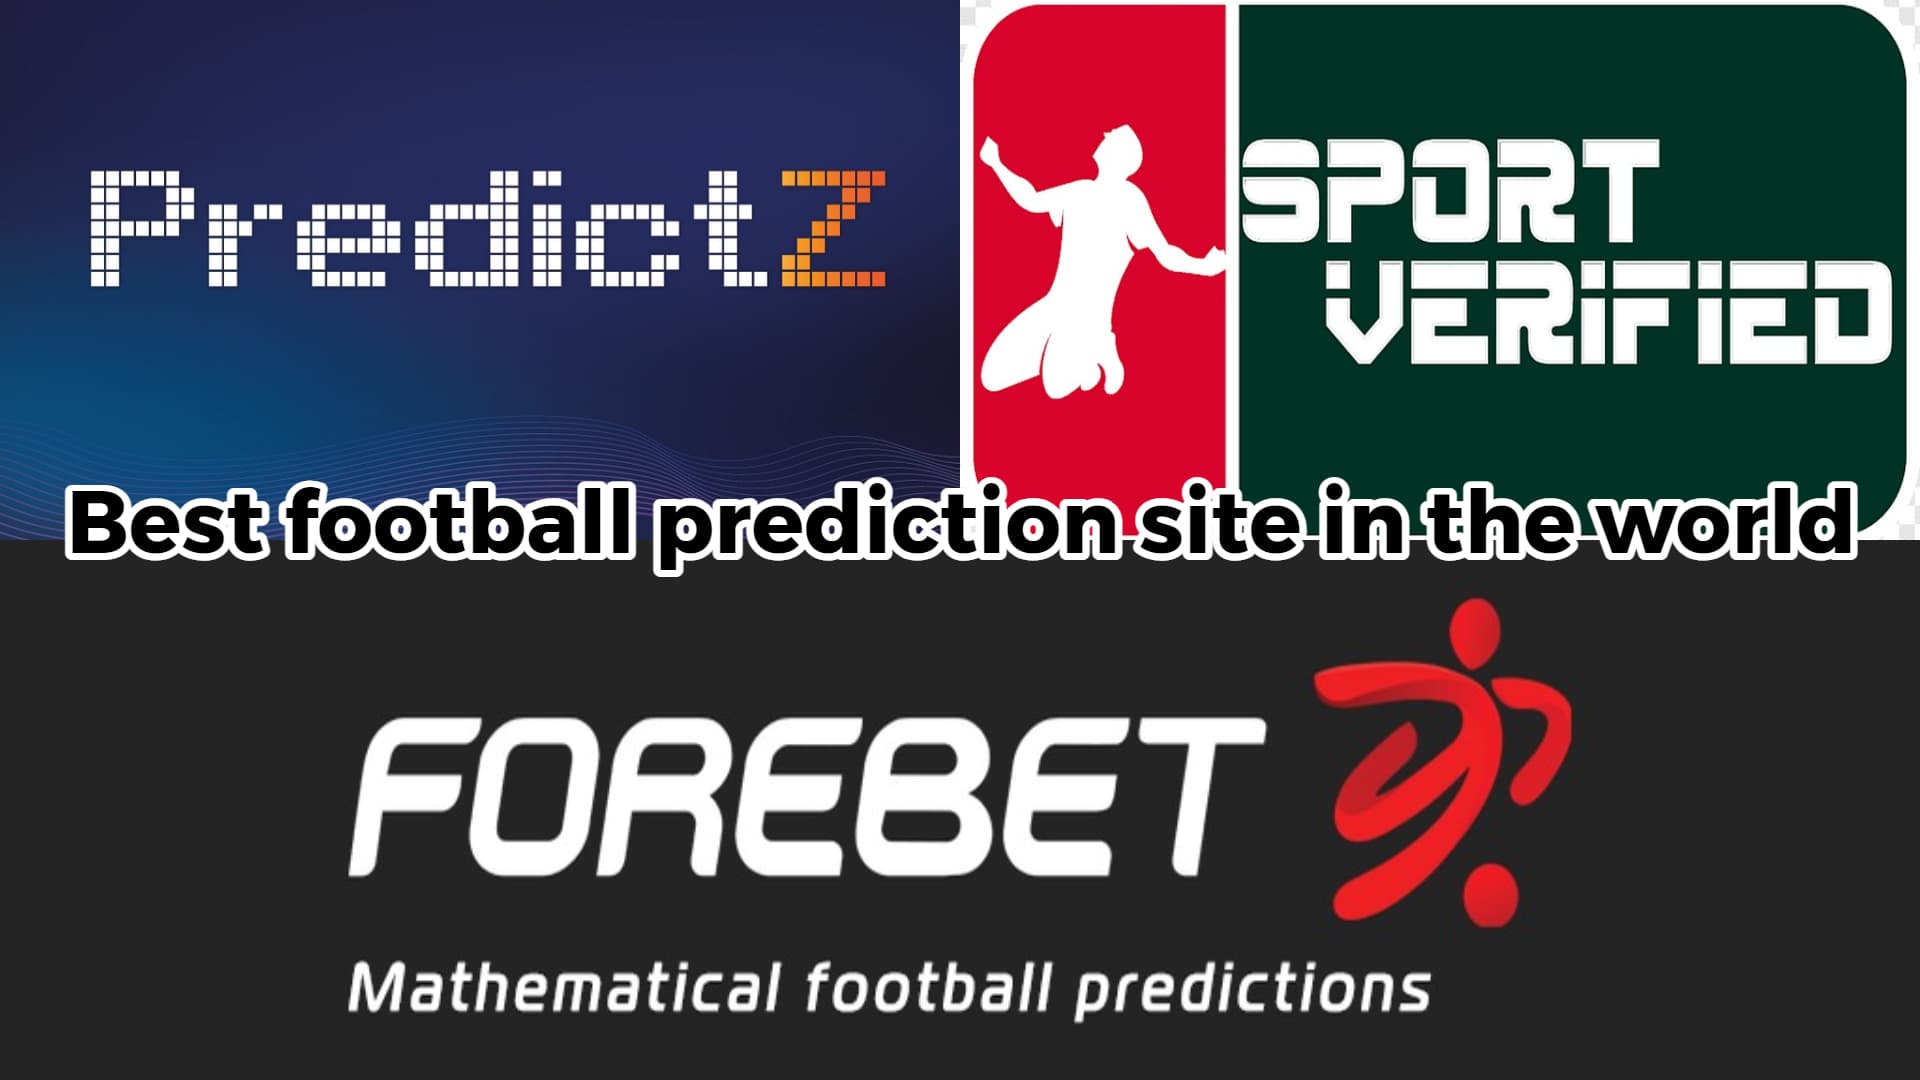 Top 12 Best football prediction site in the world